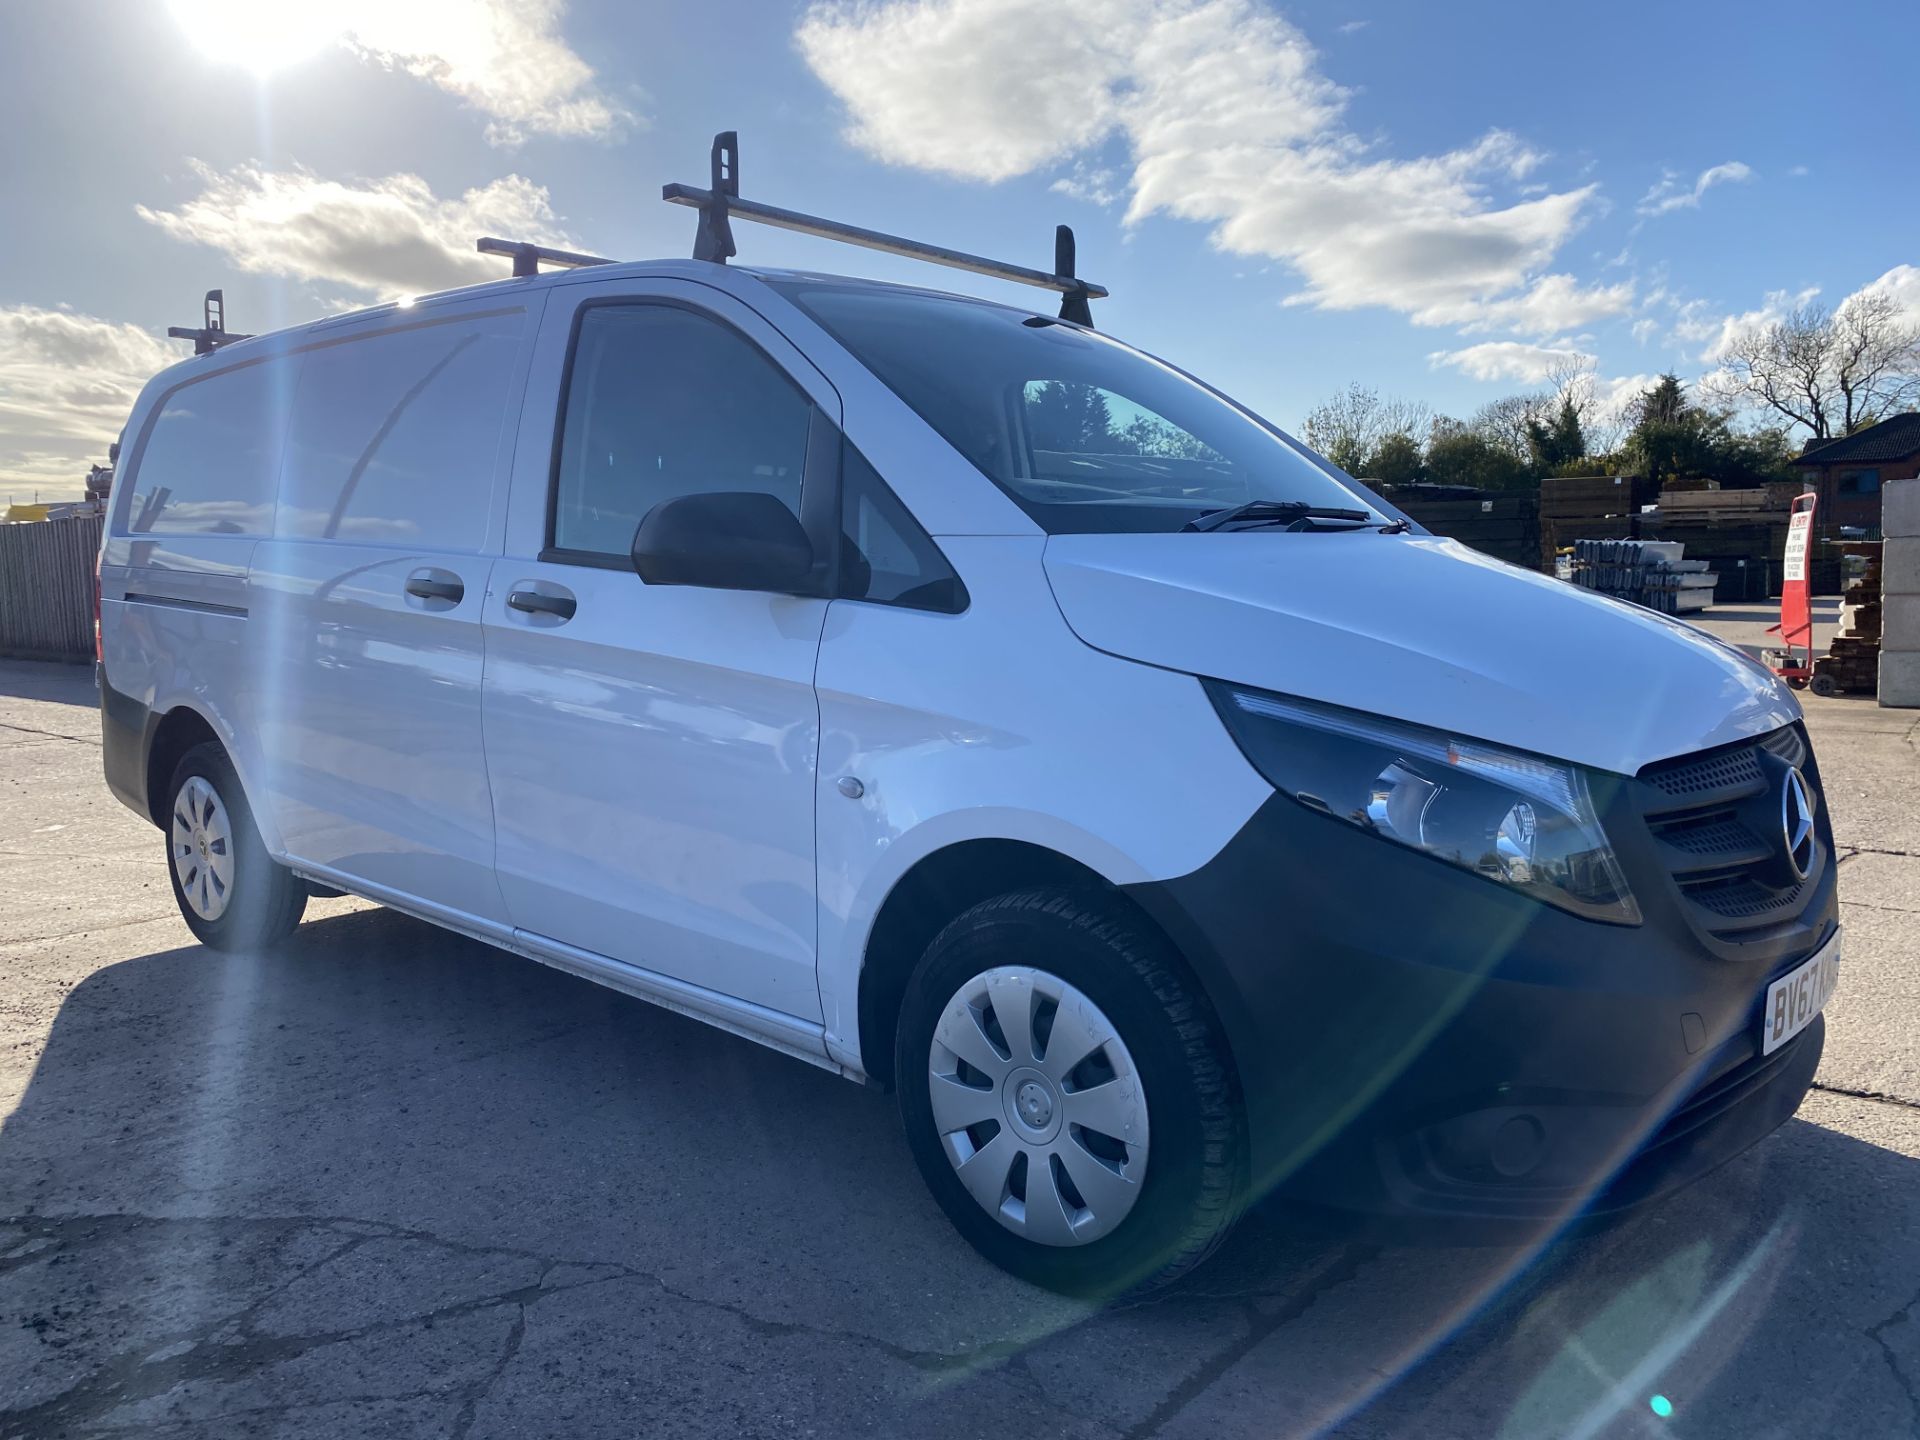 ON SALE MERCEDES VITO 114CDI BLUETEC "LWB" (EURO 6) 2018 MODEL - AIR CON - 1 KEEPER - LOOK!! - Image 4 of 19